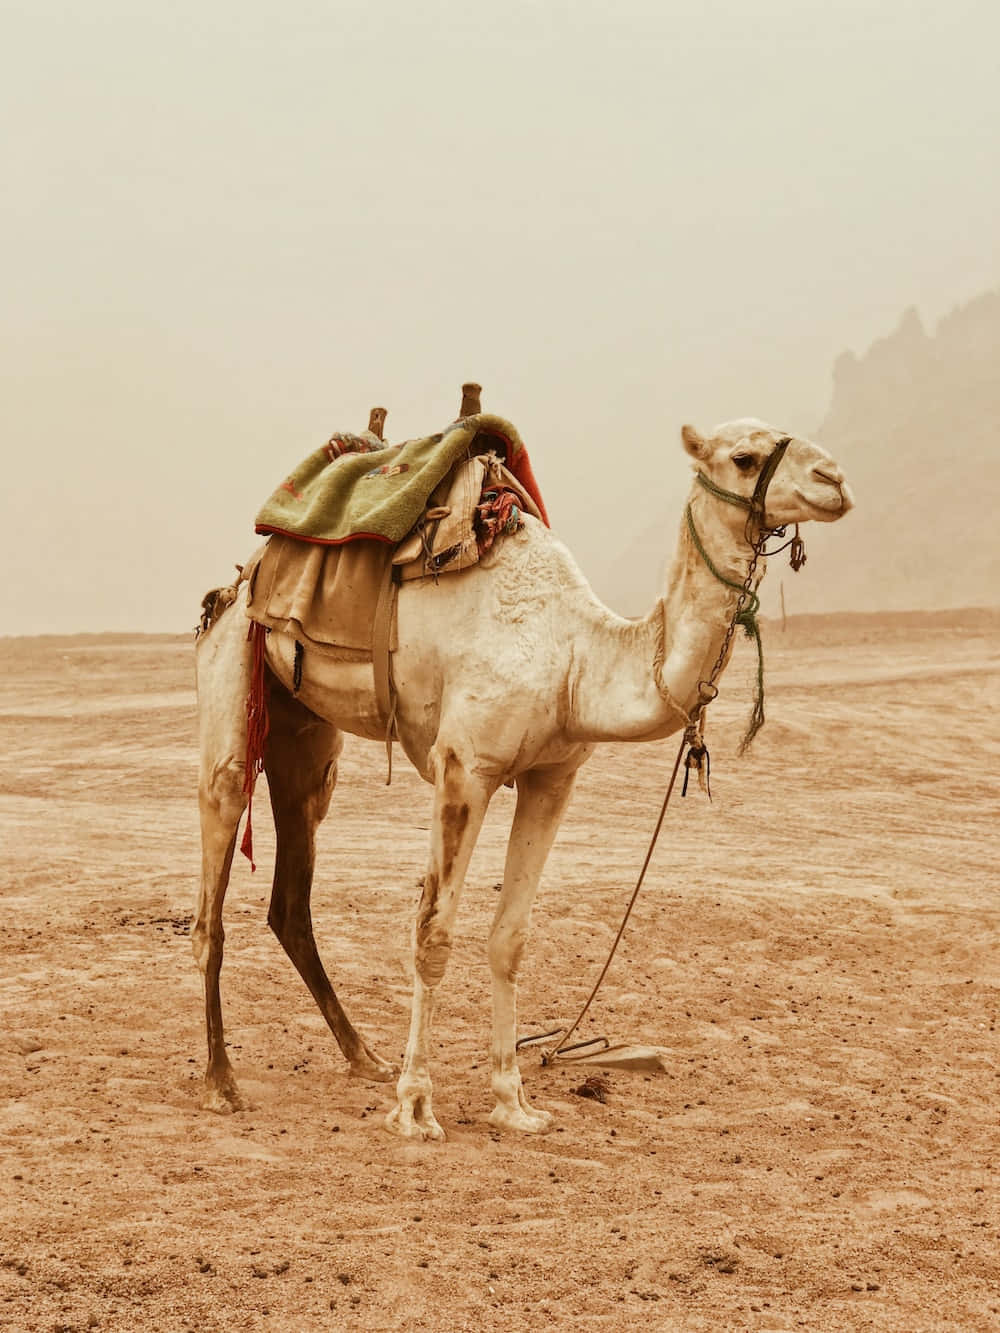 Strong, majestic and resilient - this camel is a symbol of life in a harsh desert.